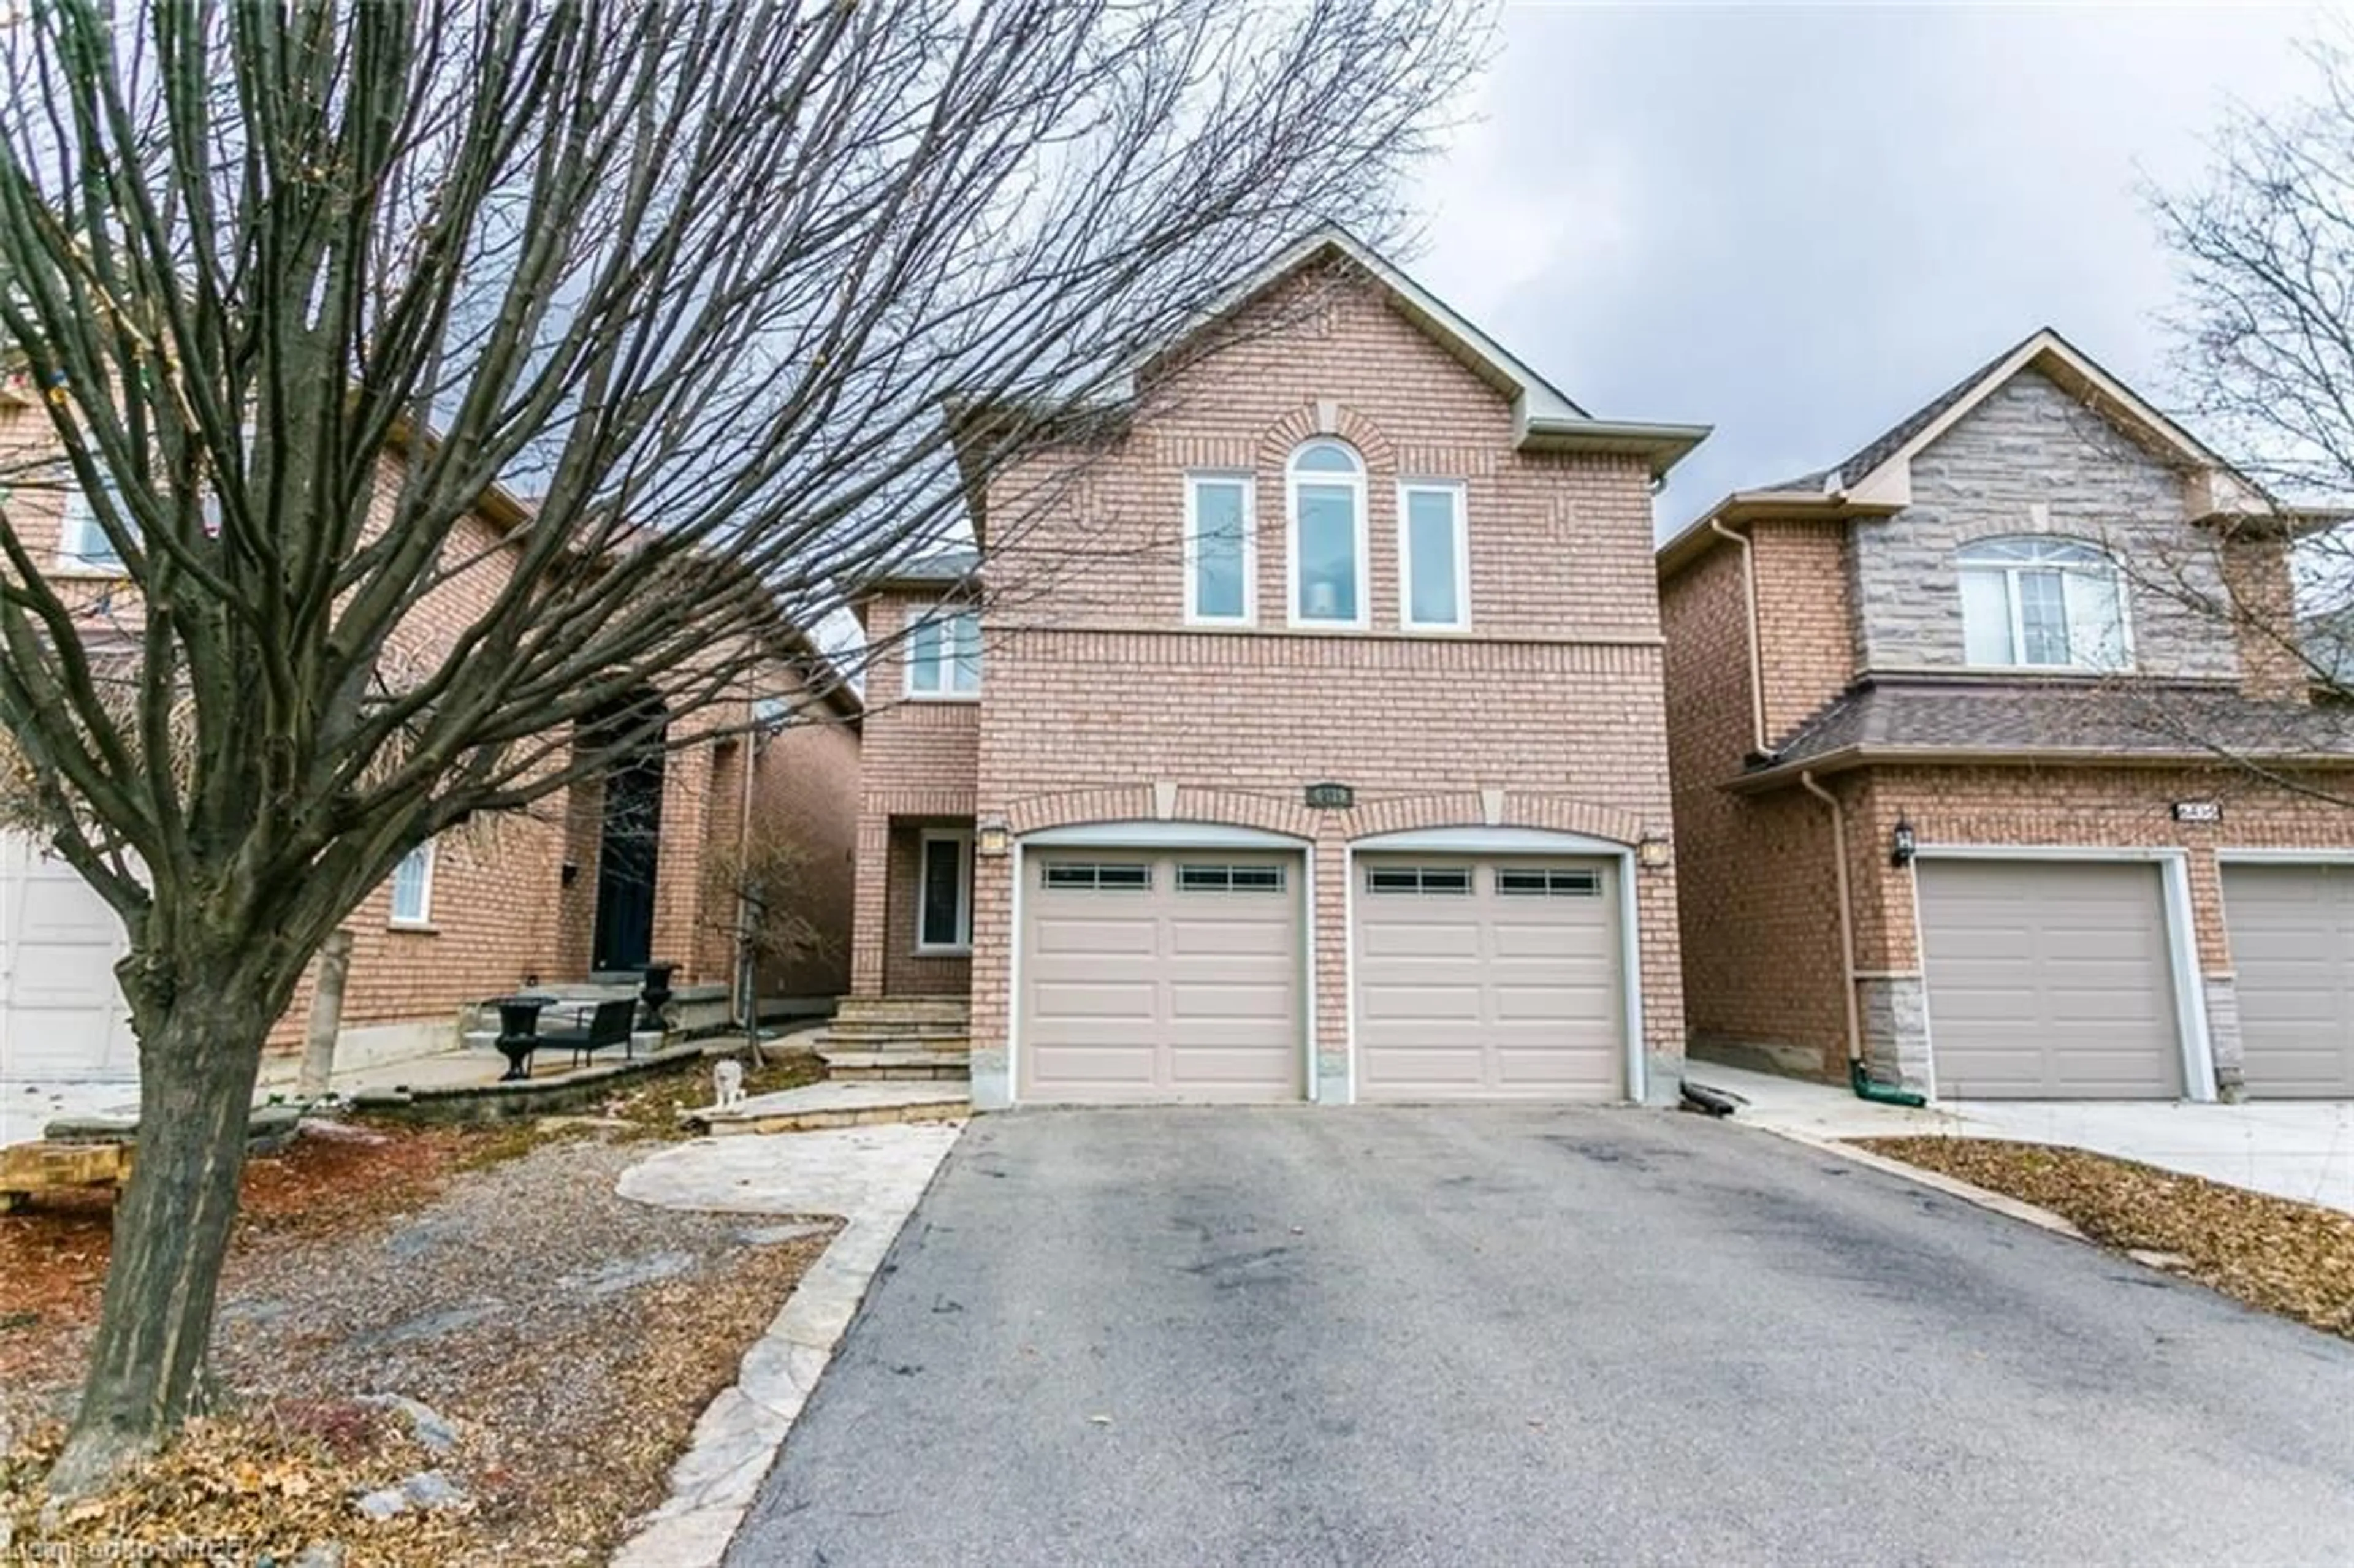 A pic from exterior of the house or condo for 6419 Hampden Woods Rd, Mississauga Ontario L5N 7V3